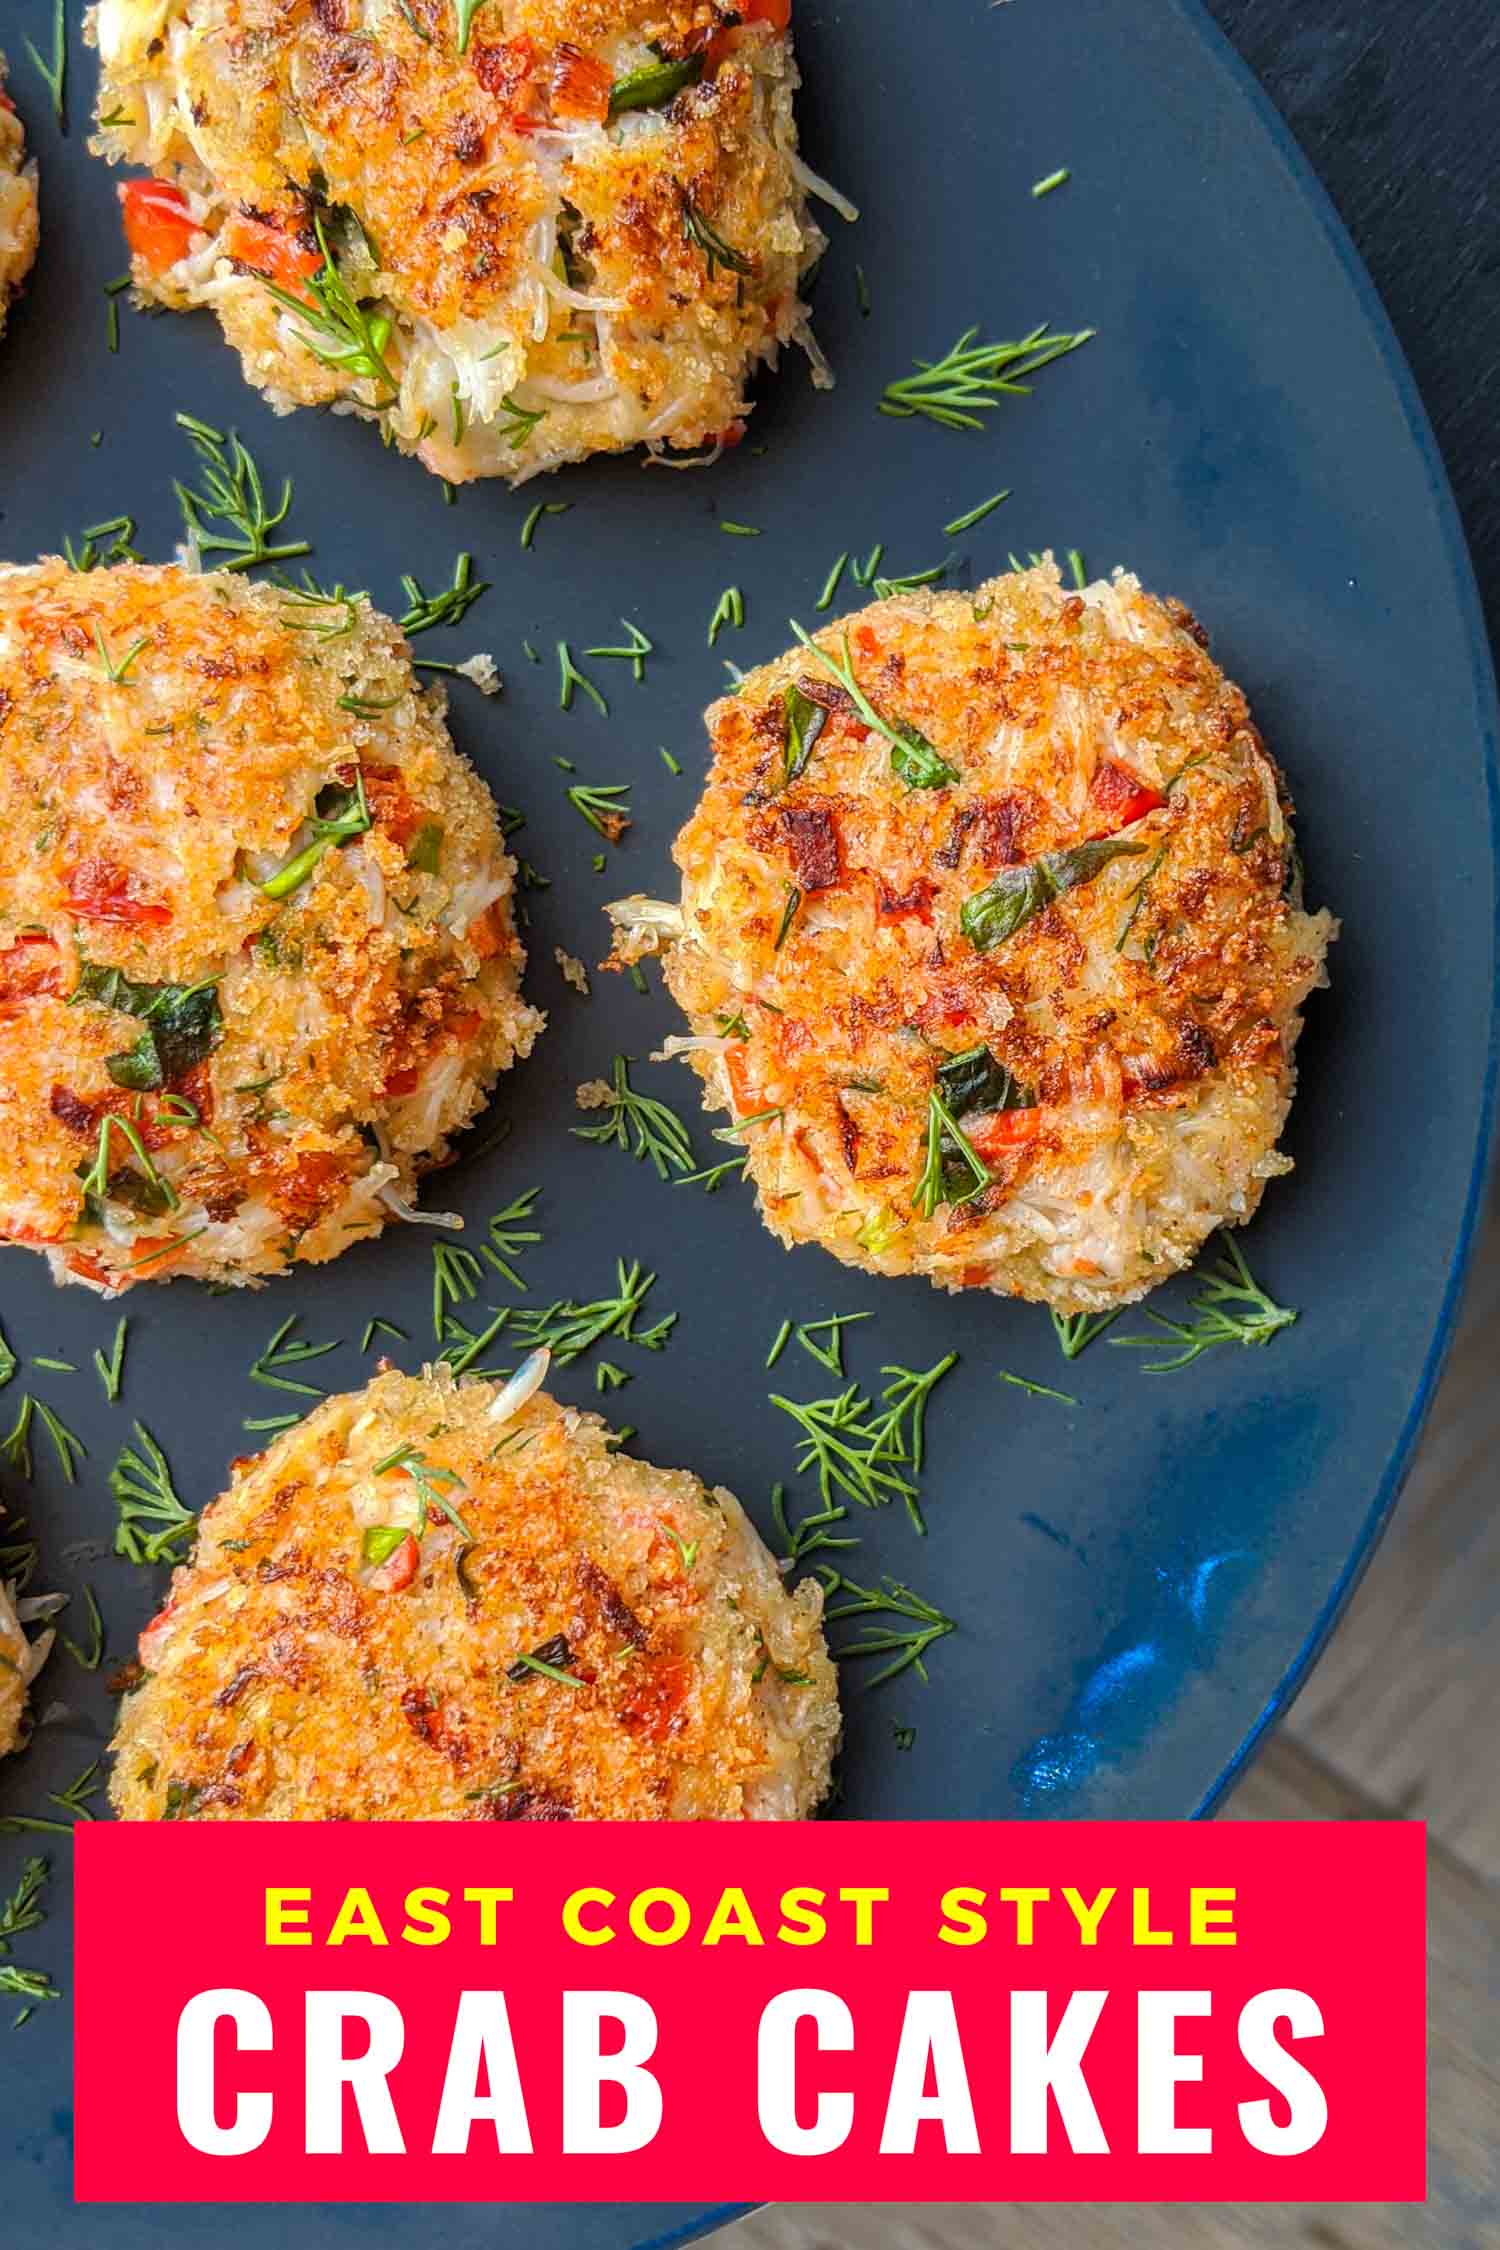 Light crab cakes with sweet meat, red peppers, panko crumbs, creamy mayonnaise and Old Bay seasoning served alongside sriracha dipping sauce. Crab cakes easy. Crab cakes sauce. Snow crabs legs recipe.